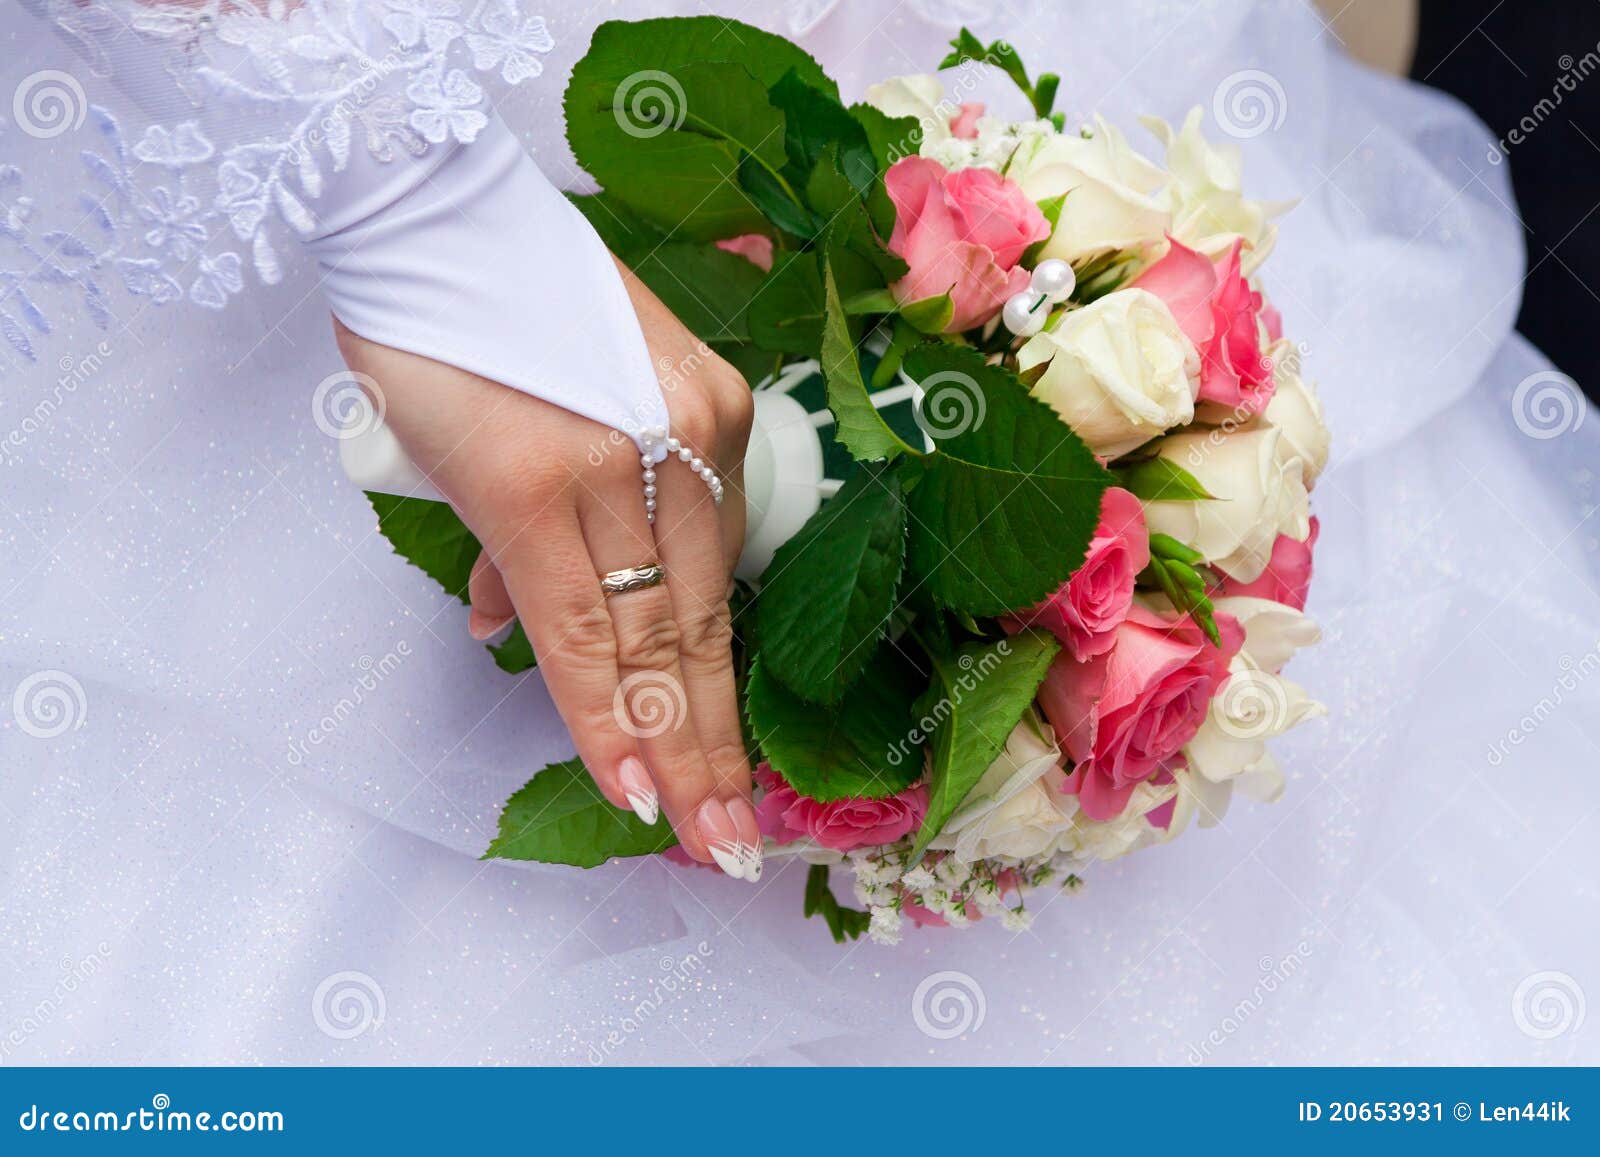 Bride S Hand Holding the Bouquet Stock Image - Image of beauty, human ...